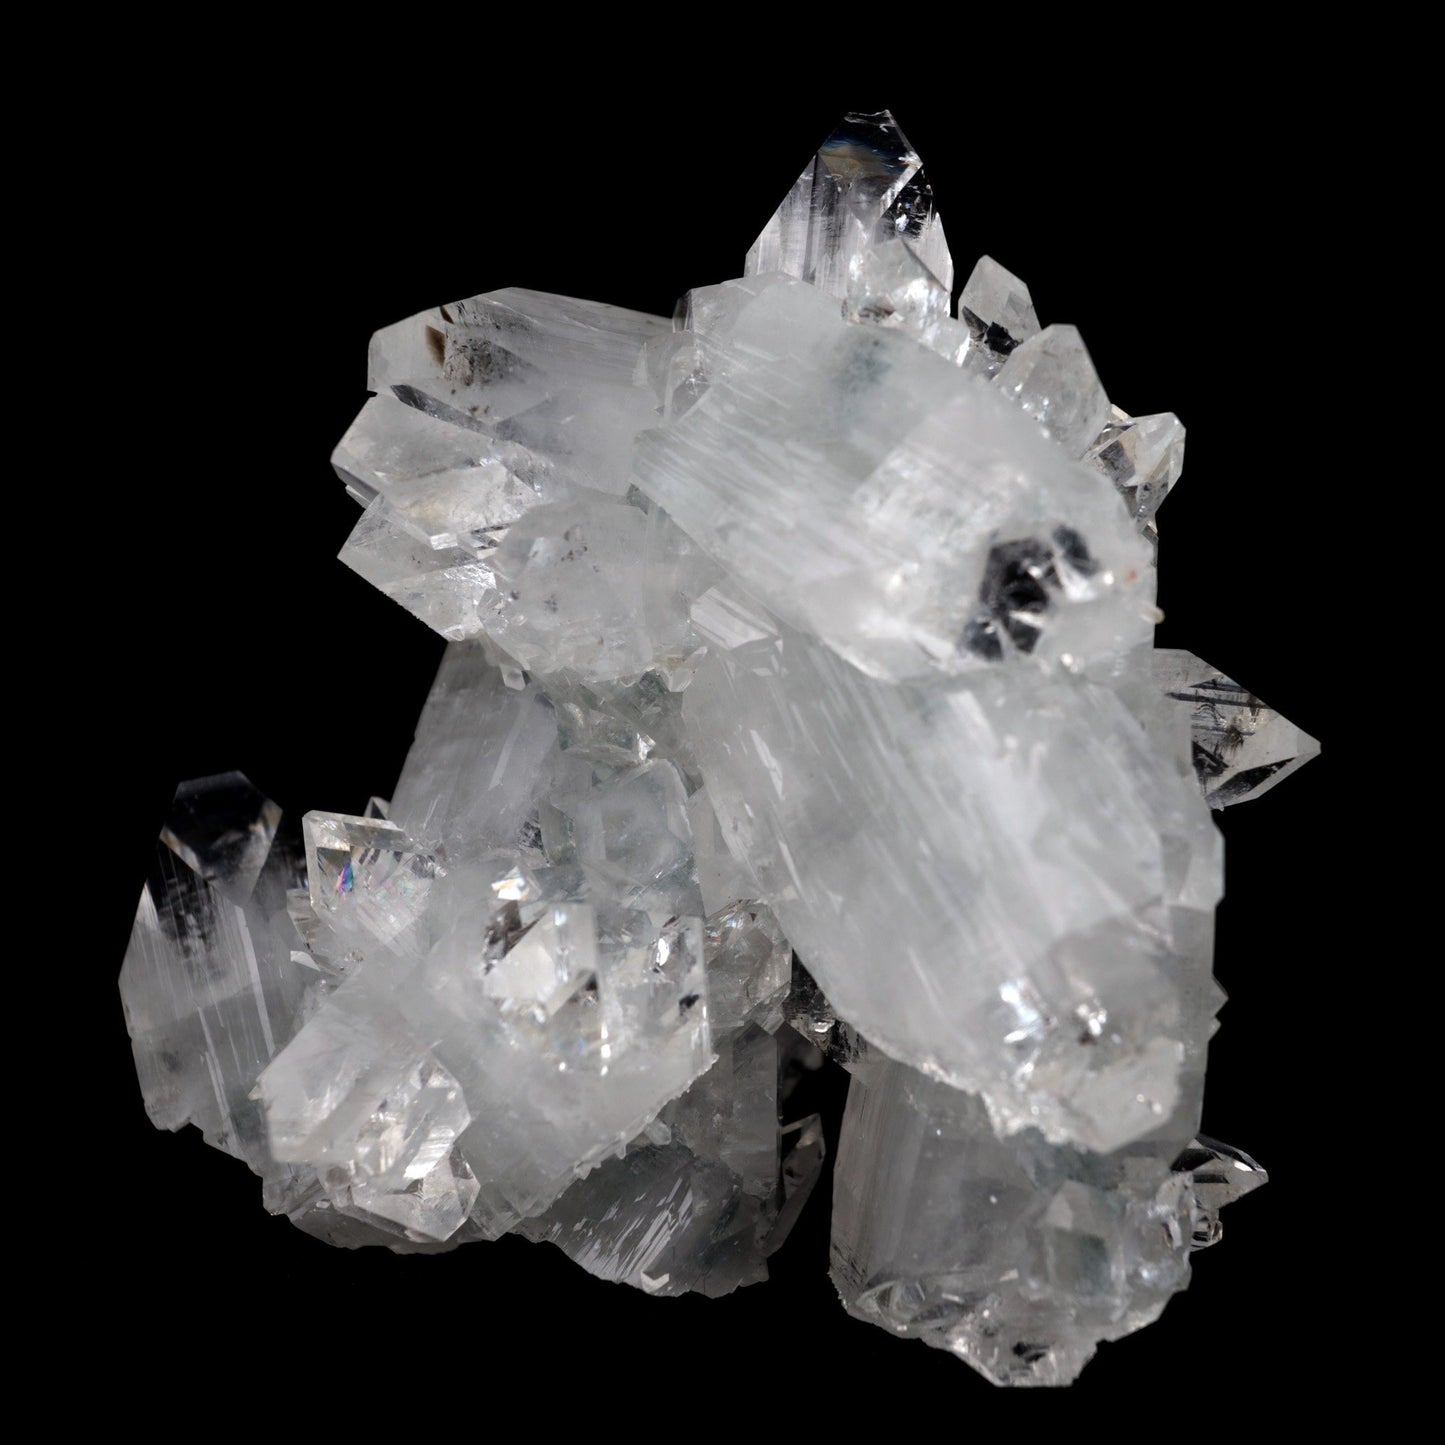 Apophyllite Terminated Sparkling Crystal Natural Mineral Specimen # B …  https://www.superbminerals.us/products/apophyllite-terminated-sparkling-crystal-natural-mineral-specimen-b-3928  FeaturesThis is a beautifully balanced and aesthetic specimen of water clear, transparent Apophyllite. Positioned perfectly in the center of a mass of lustrous Apophyllite crystals, is a large, perfect pyramidal Apophyllite crystal. This piece really stands out, is a great show piece, and has no damage